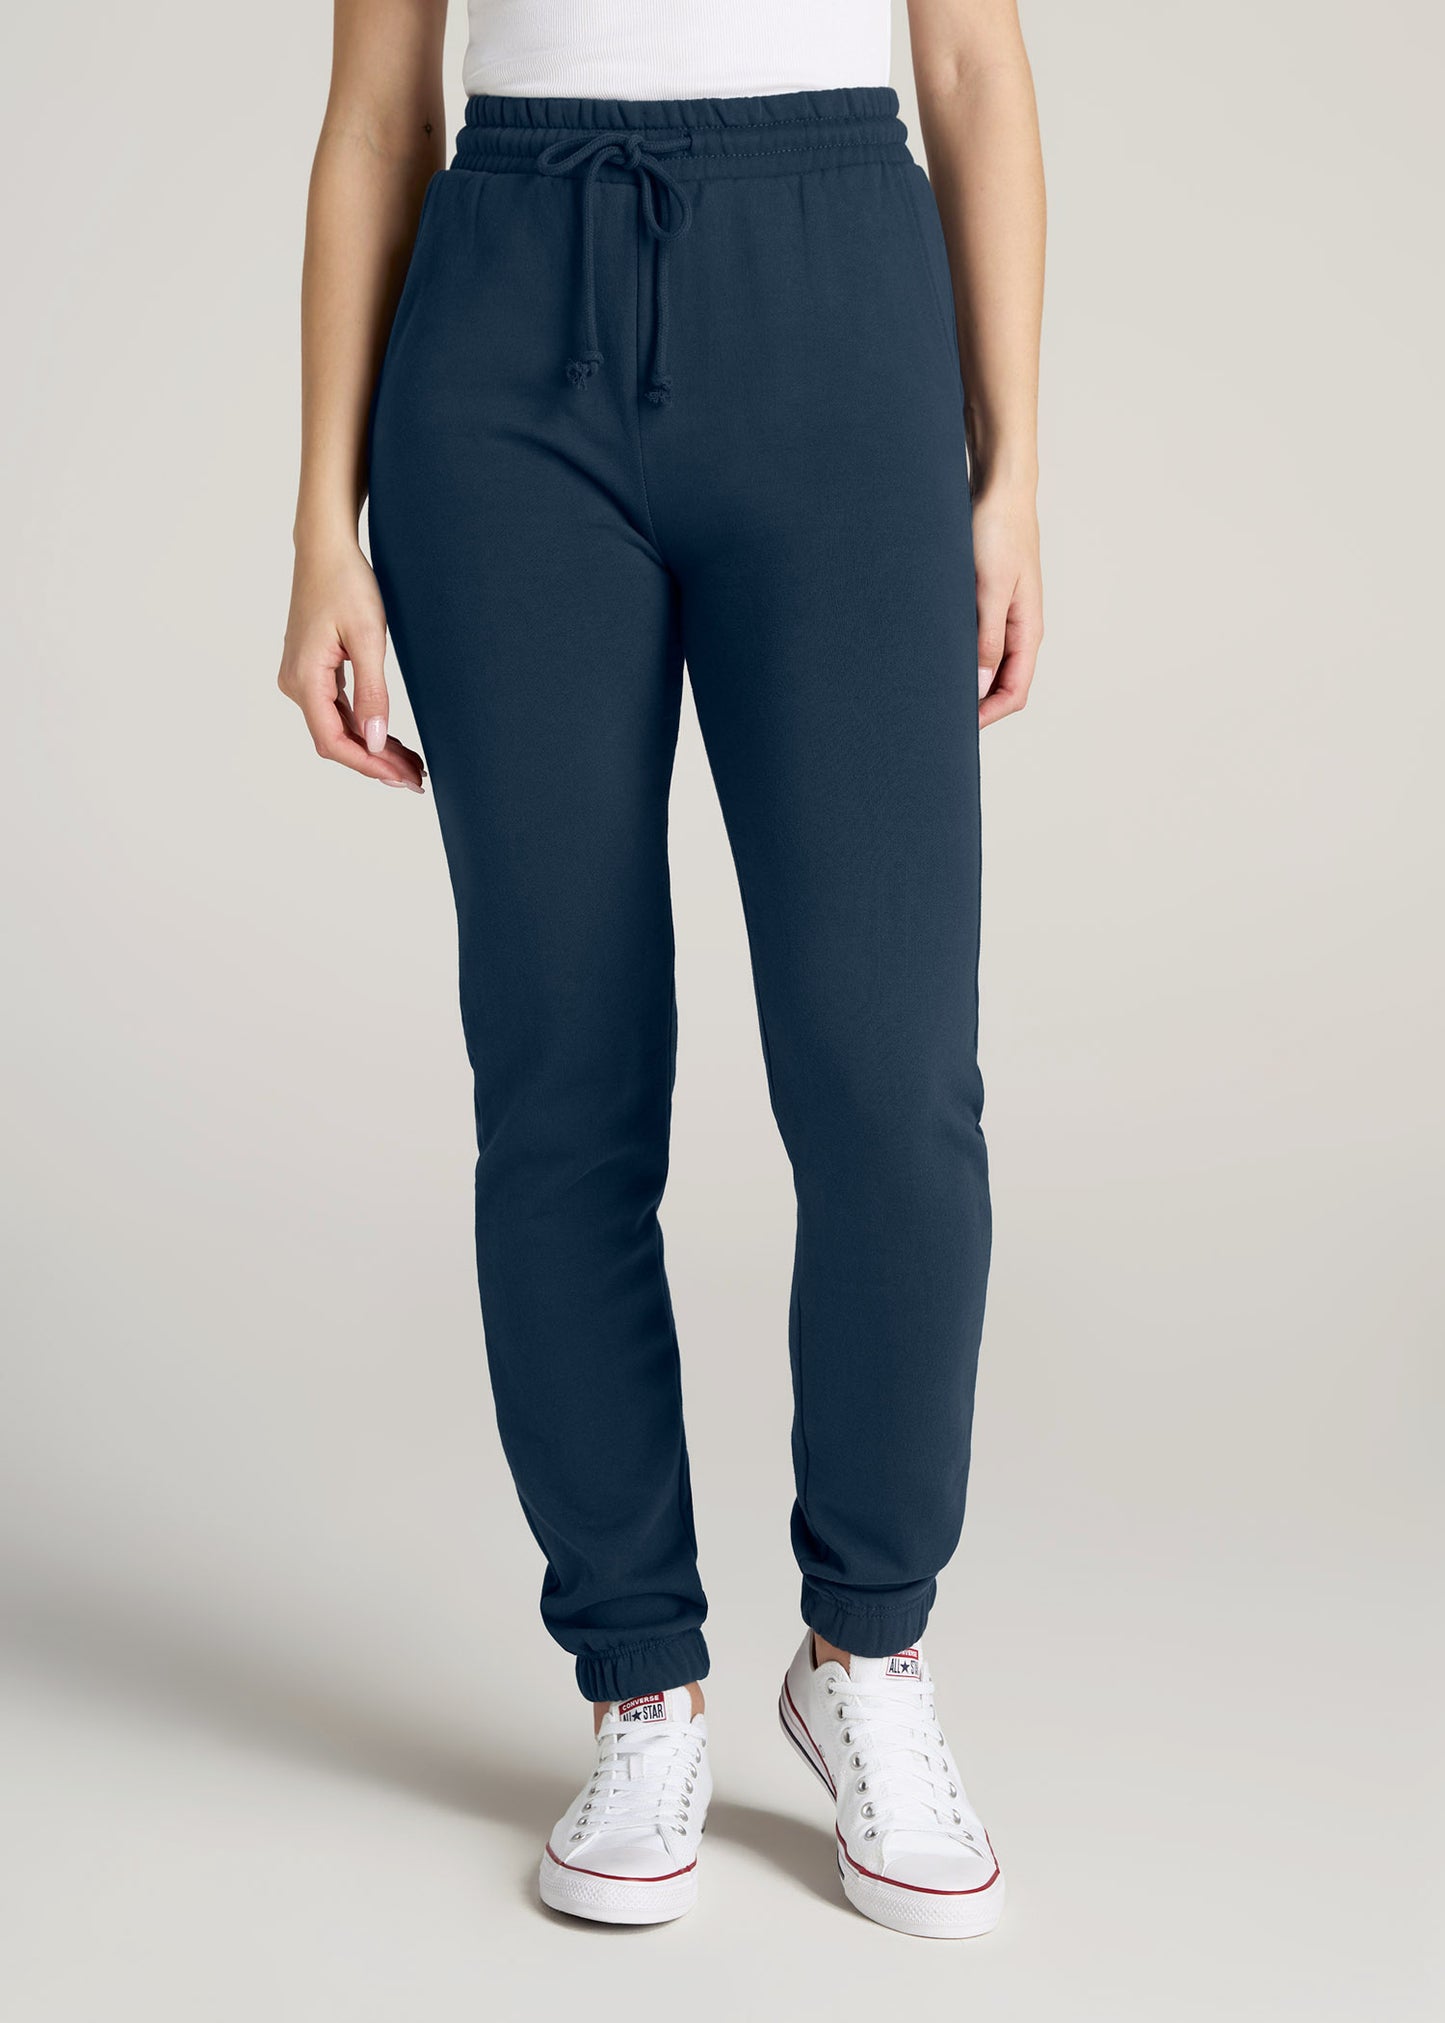 Wearever High-Waisted Tall Women's Sweatpants Bright Navy – American Tall